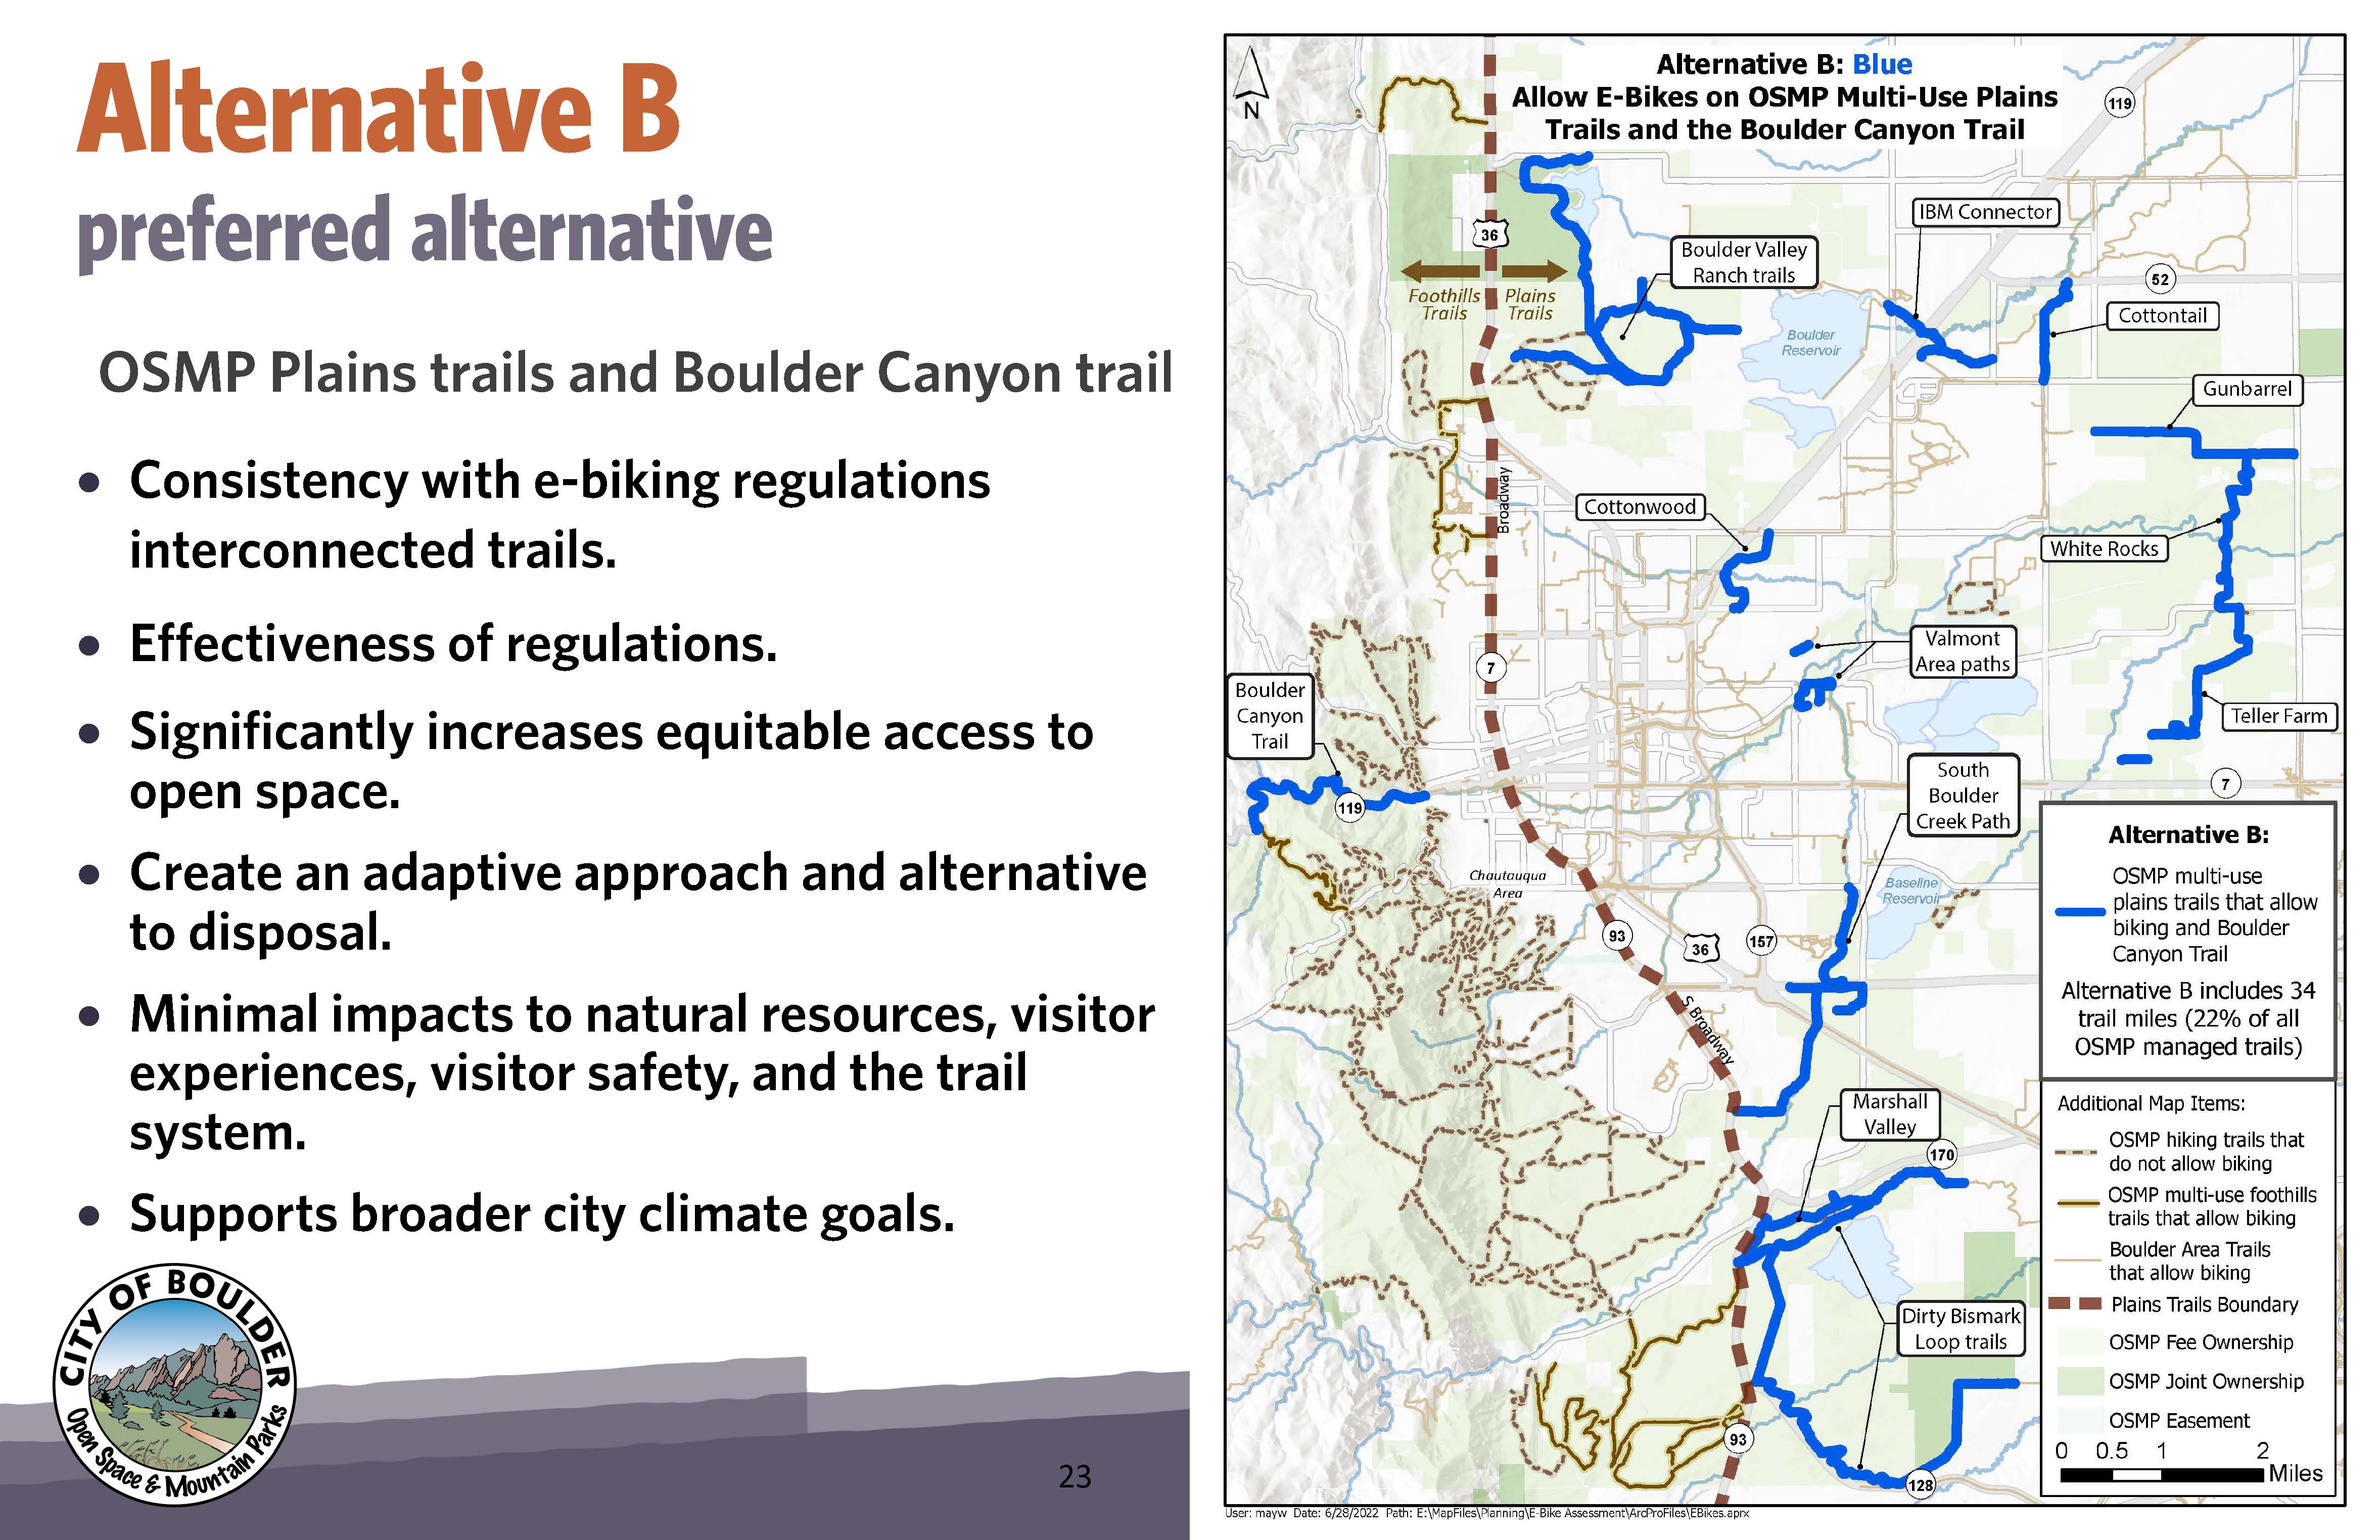 E-Biking Preferred Alternative B: Map with Plains Trails and Boulder Canyon Trail highlighted, and summary of reasons staff support alternative B.